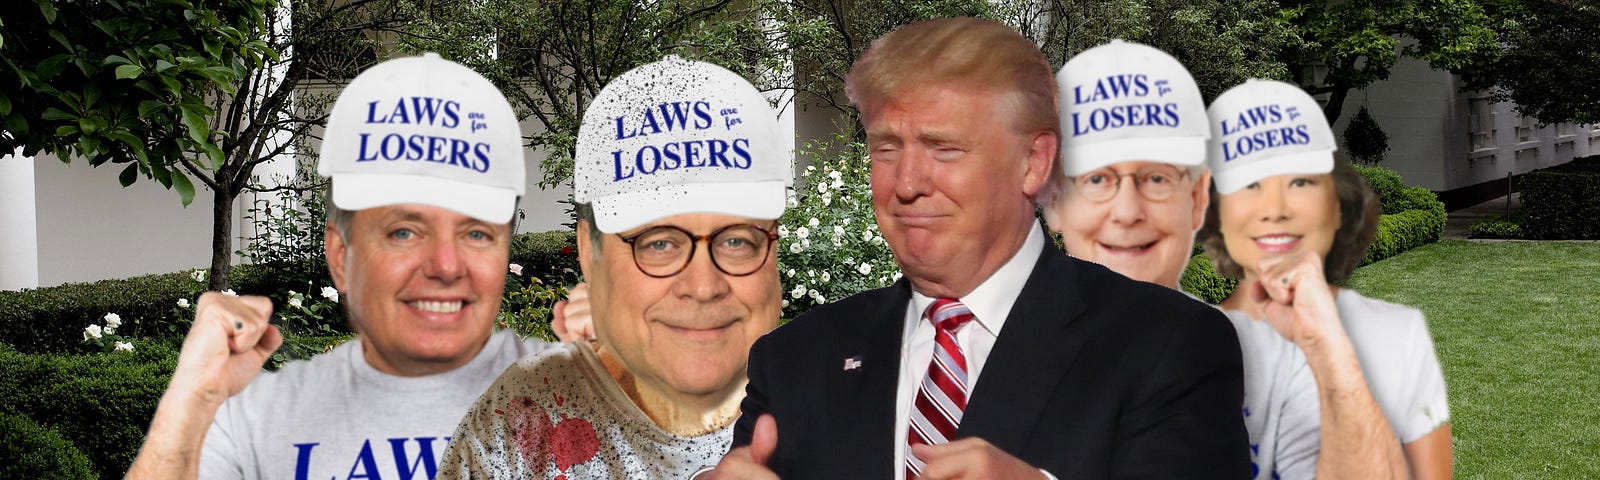 Trump and GOP politicians posing in “Laws Are For Losers” gear.